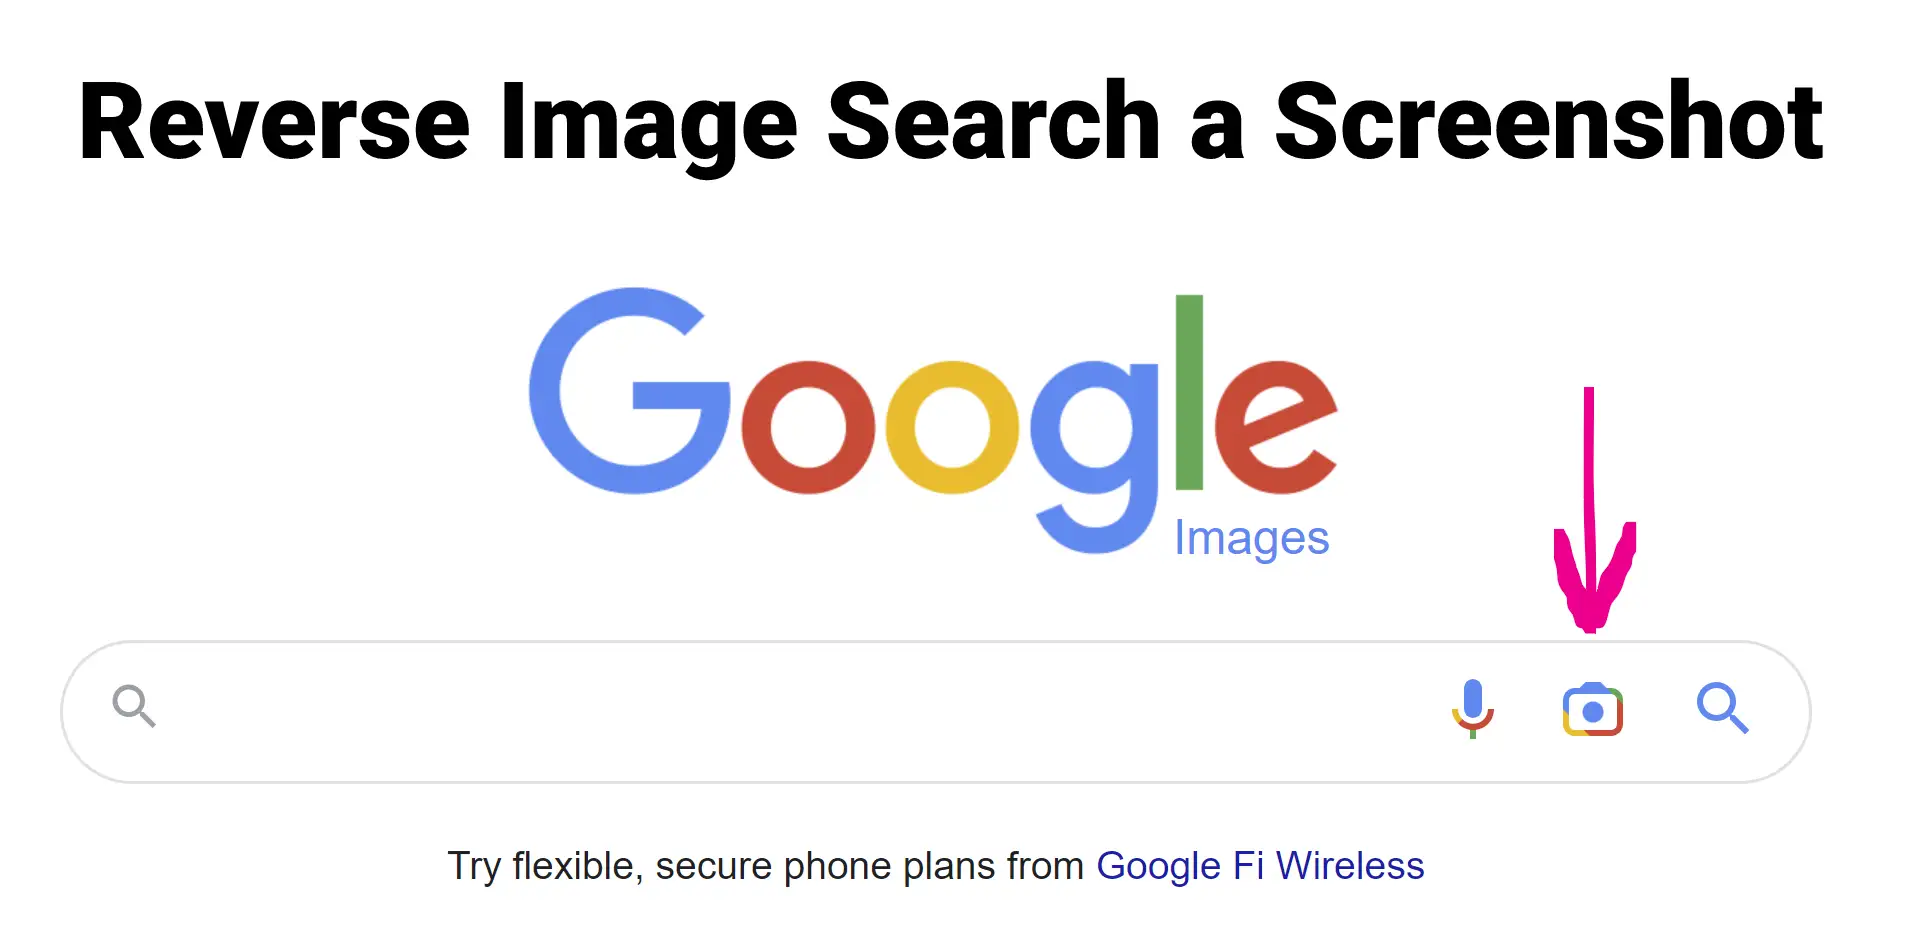 How to Reverse Image Search a Screenshot with